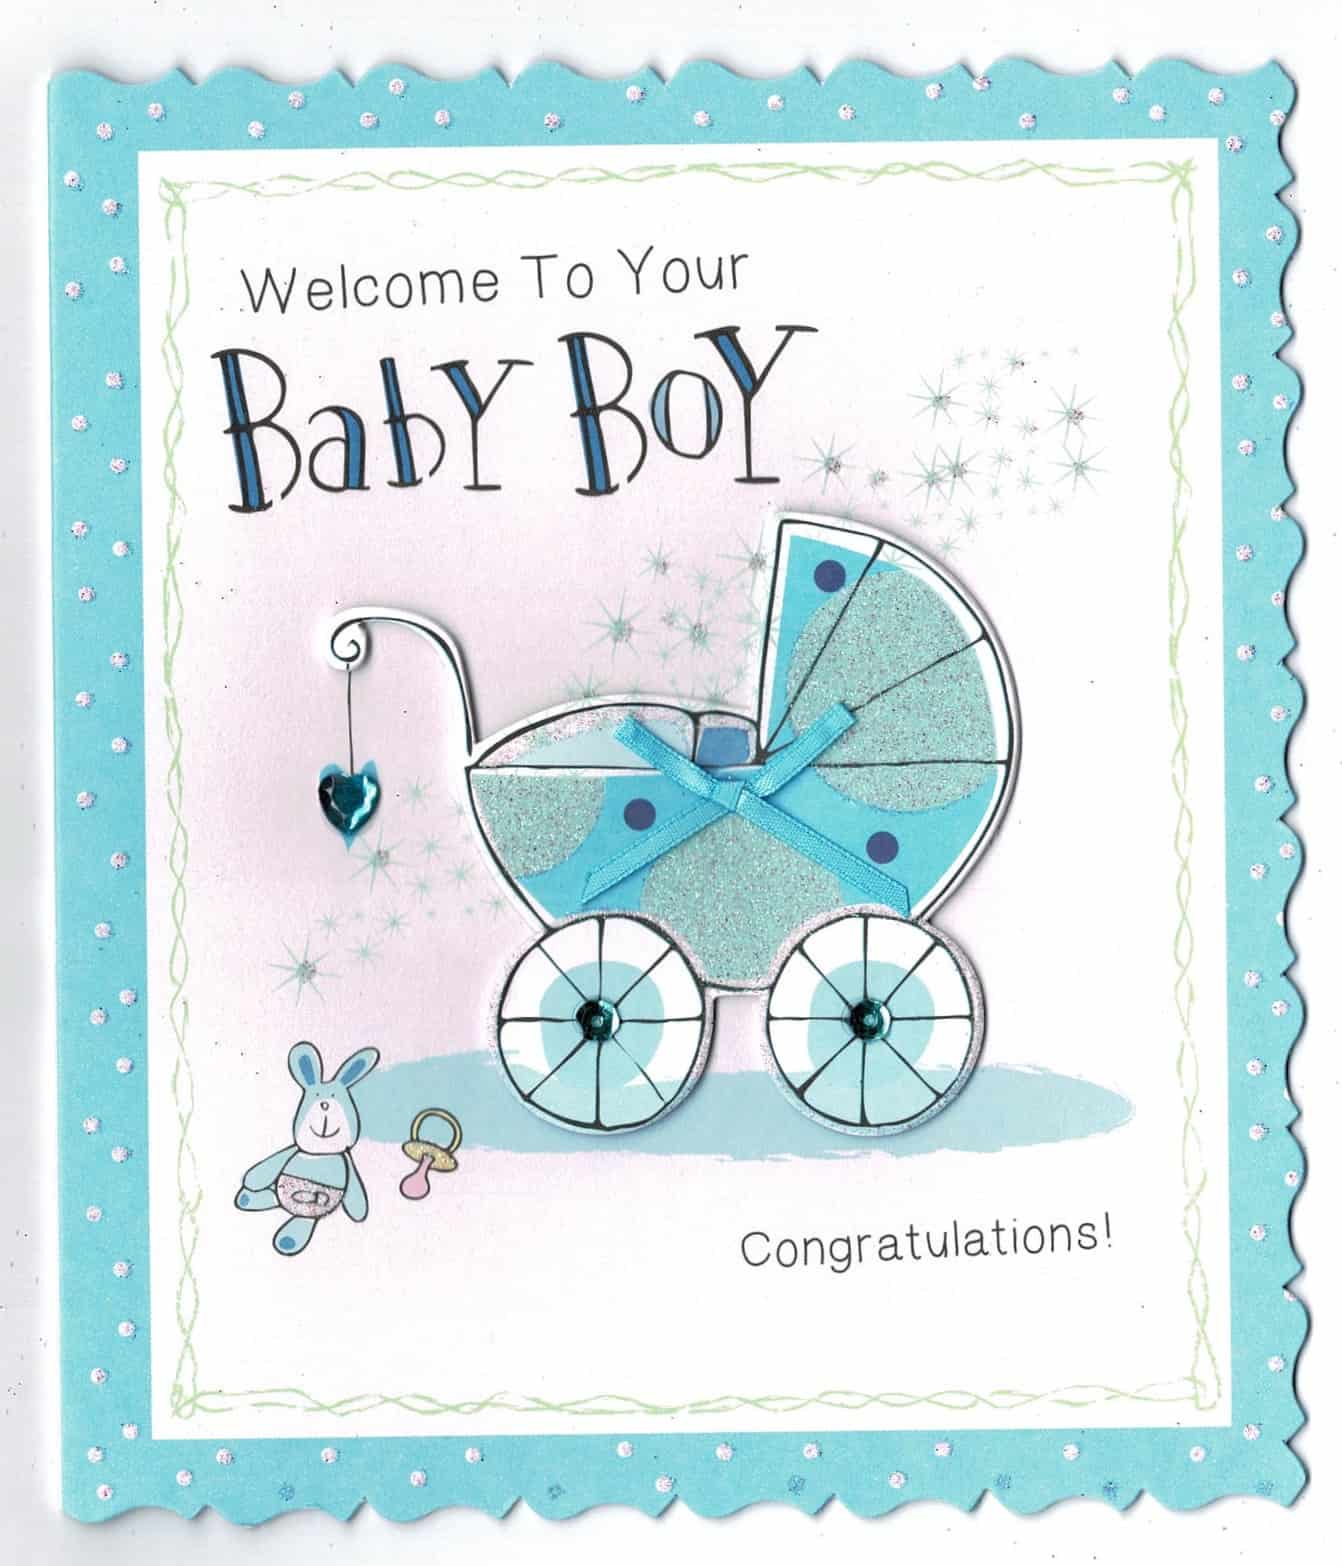 Download New Baby Boy Card 'Welcome To Your Baby Boy' | eBay